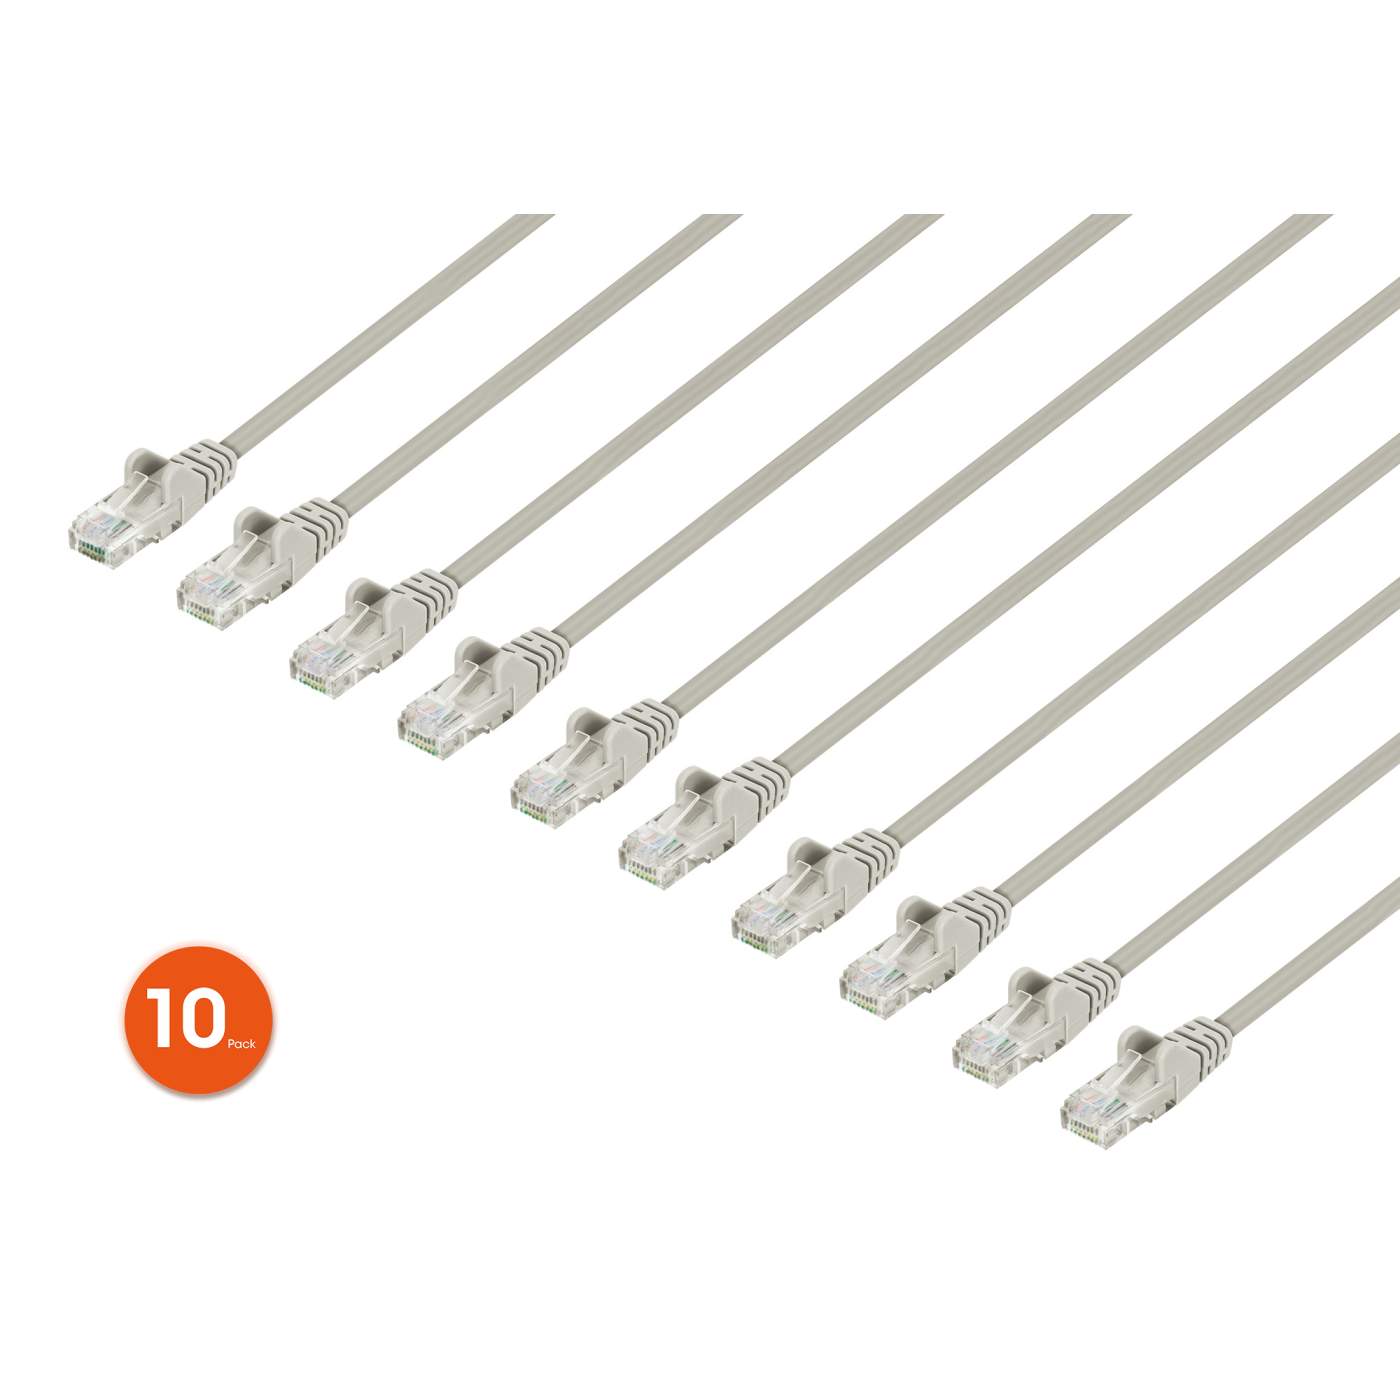 Cat6 U/UTP Slim Network Patch Cable, 7 ft., Gray, 10-Pack Image 1